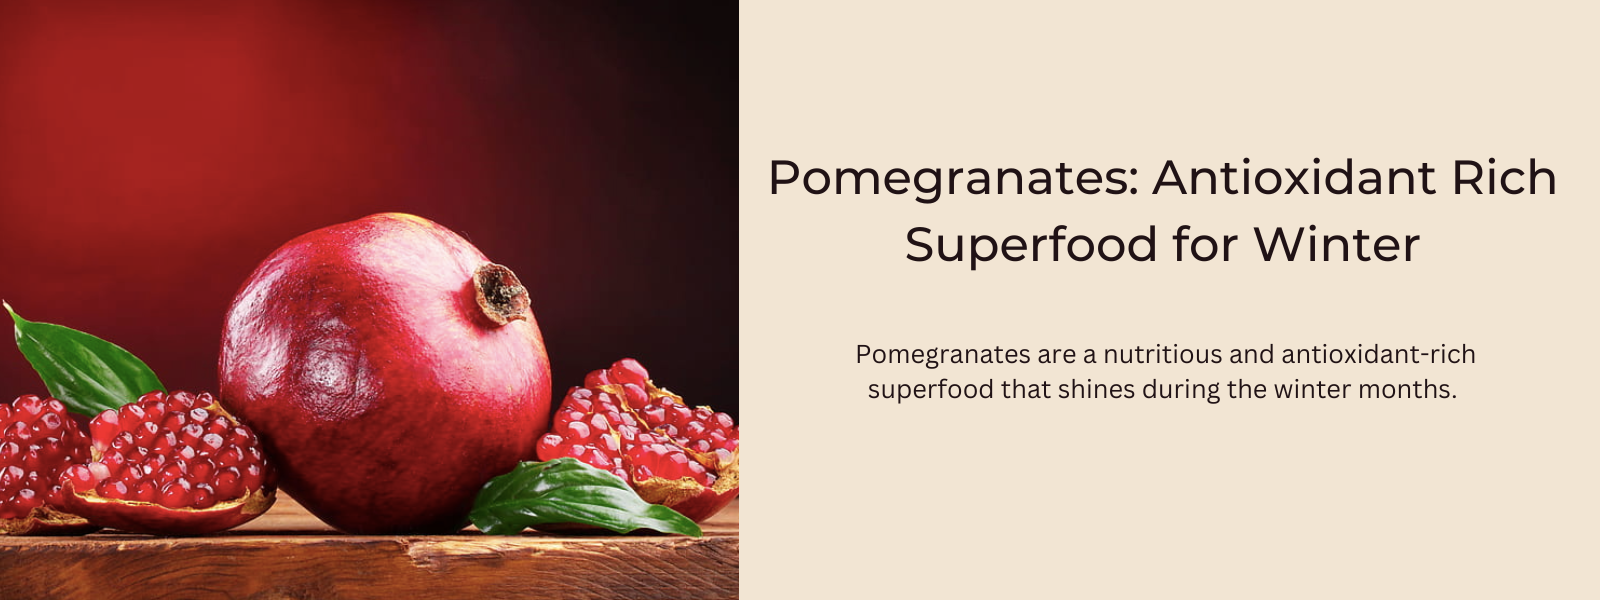 Pomegranates: Antioxidant Rich Superfood for Winter